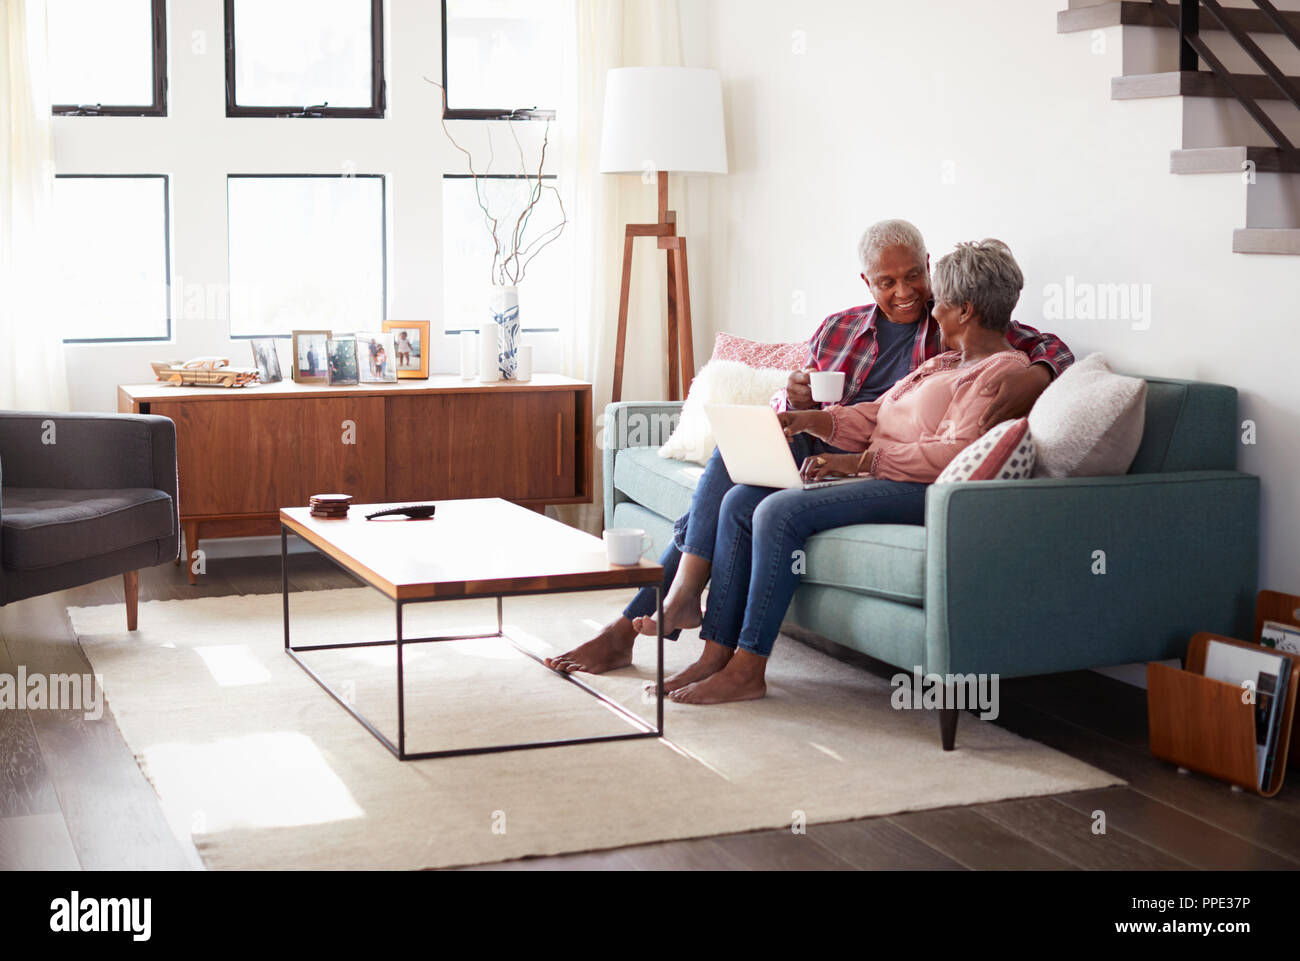 Senior Couple Sitting On Sofa At Home Using Laptop To Shop Online Stock Photo